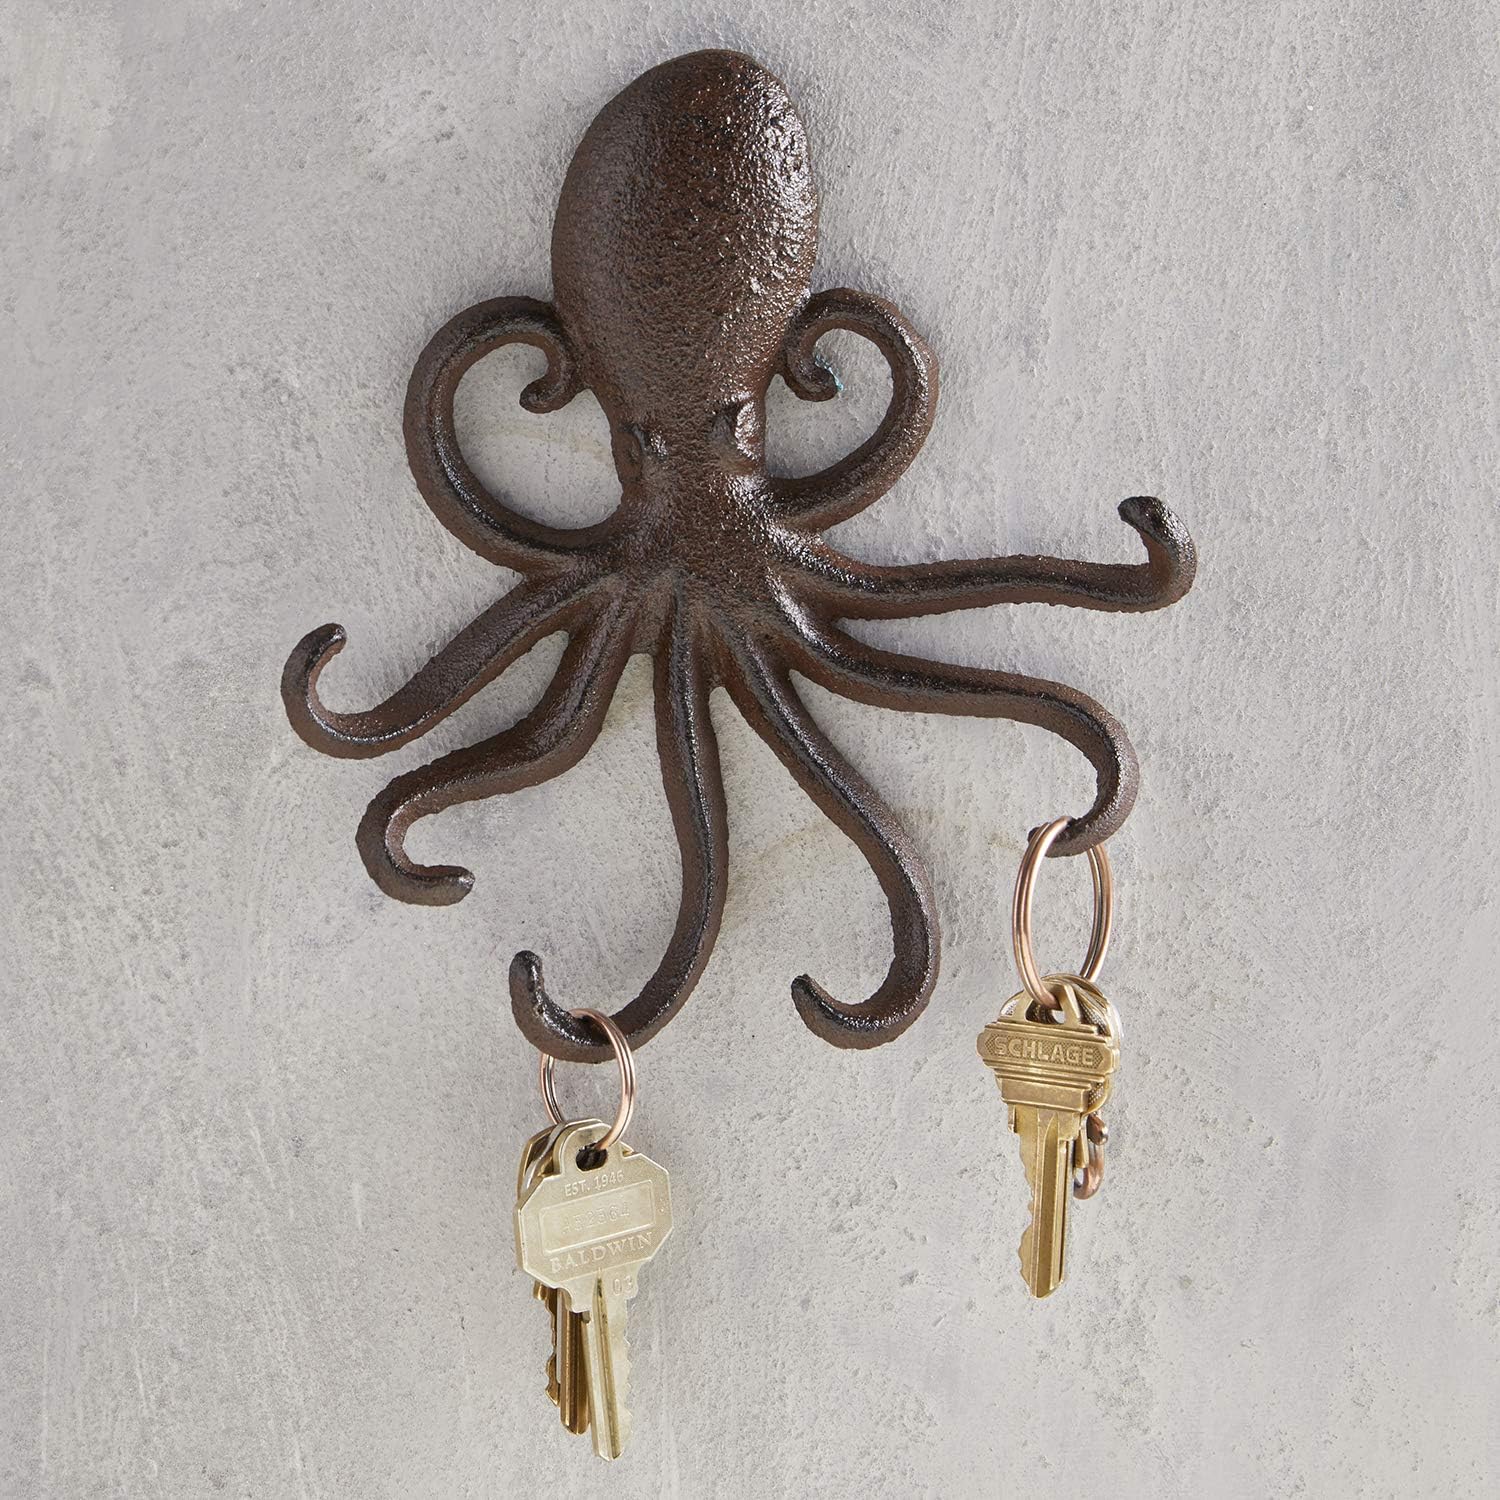 Octopus Cast Iron Hook | Unique Whimsical Decorative Wall Hook | 6.75" x 6"